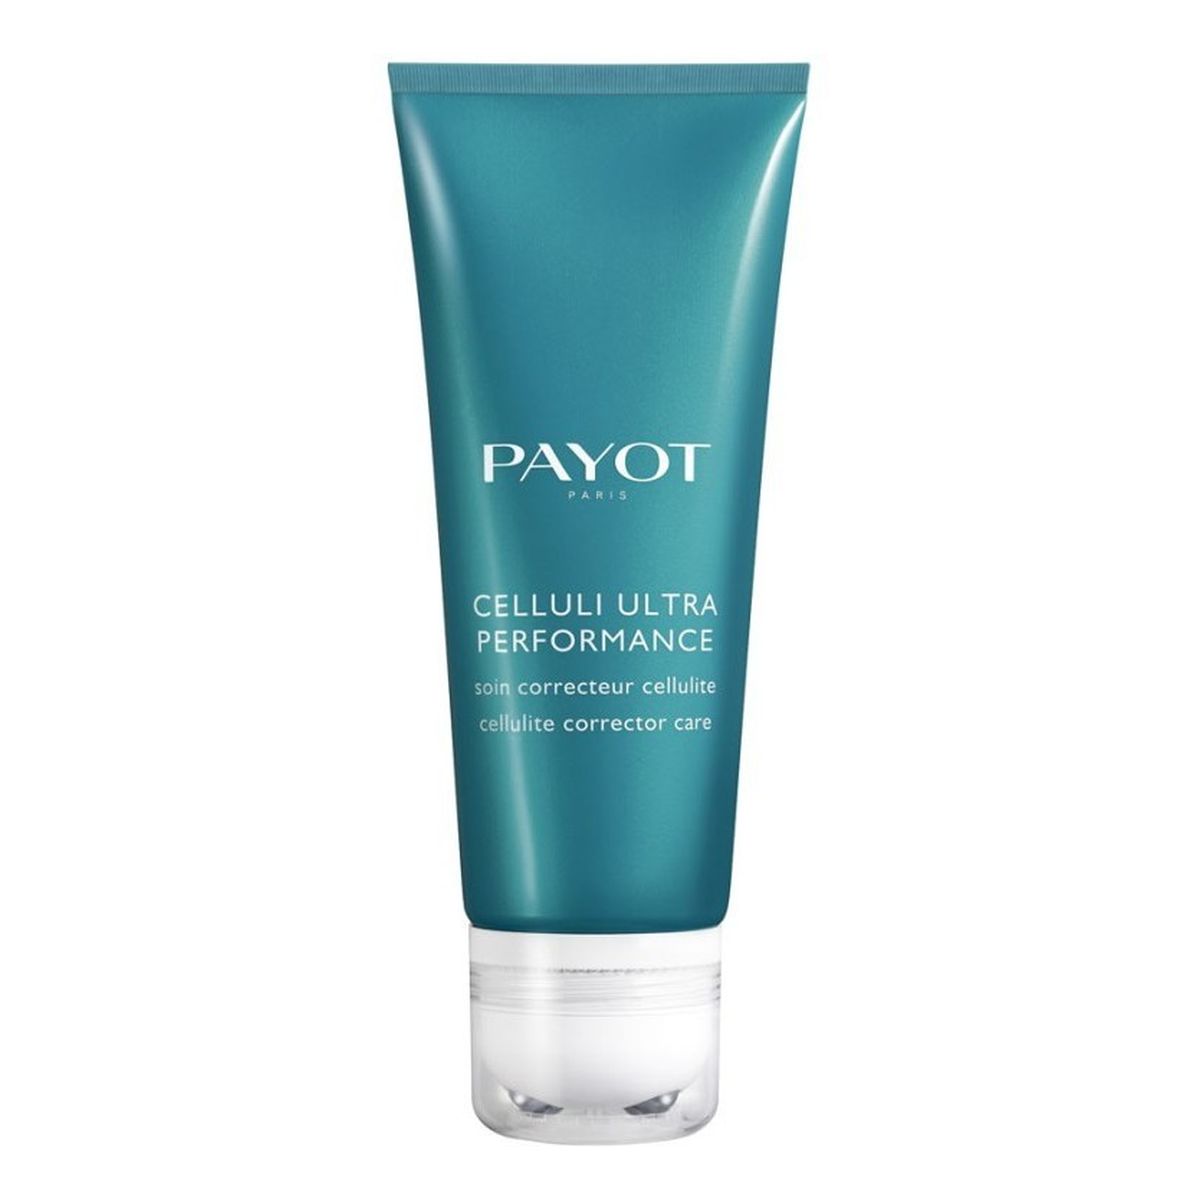 Payot Celluli Ultra Performance Cellulite Corrector Care Żel - krem antycellulitowy 200ml